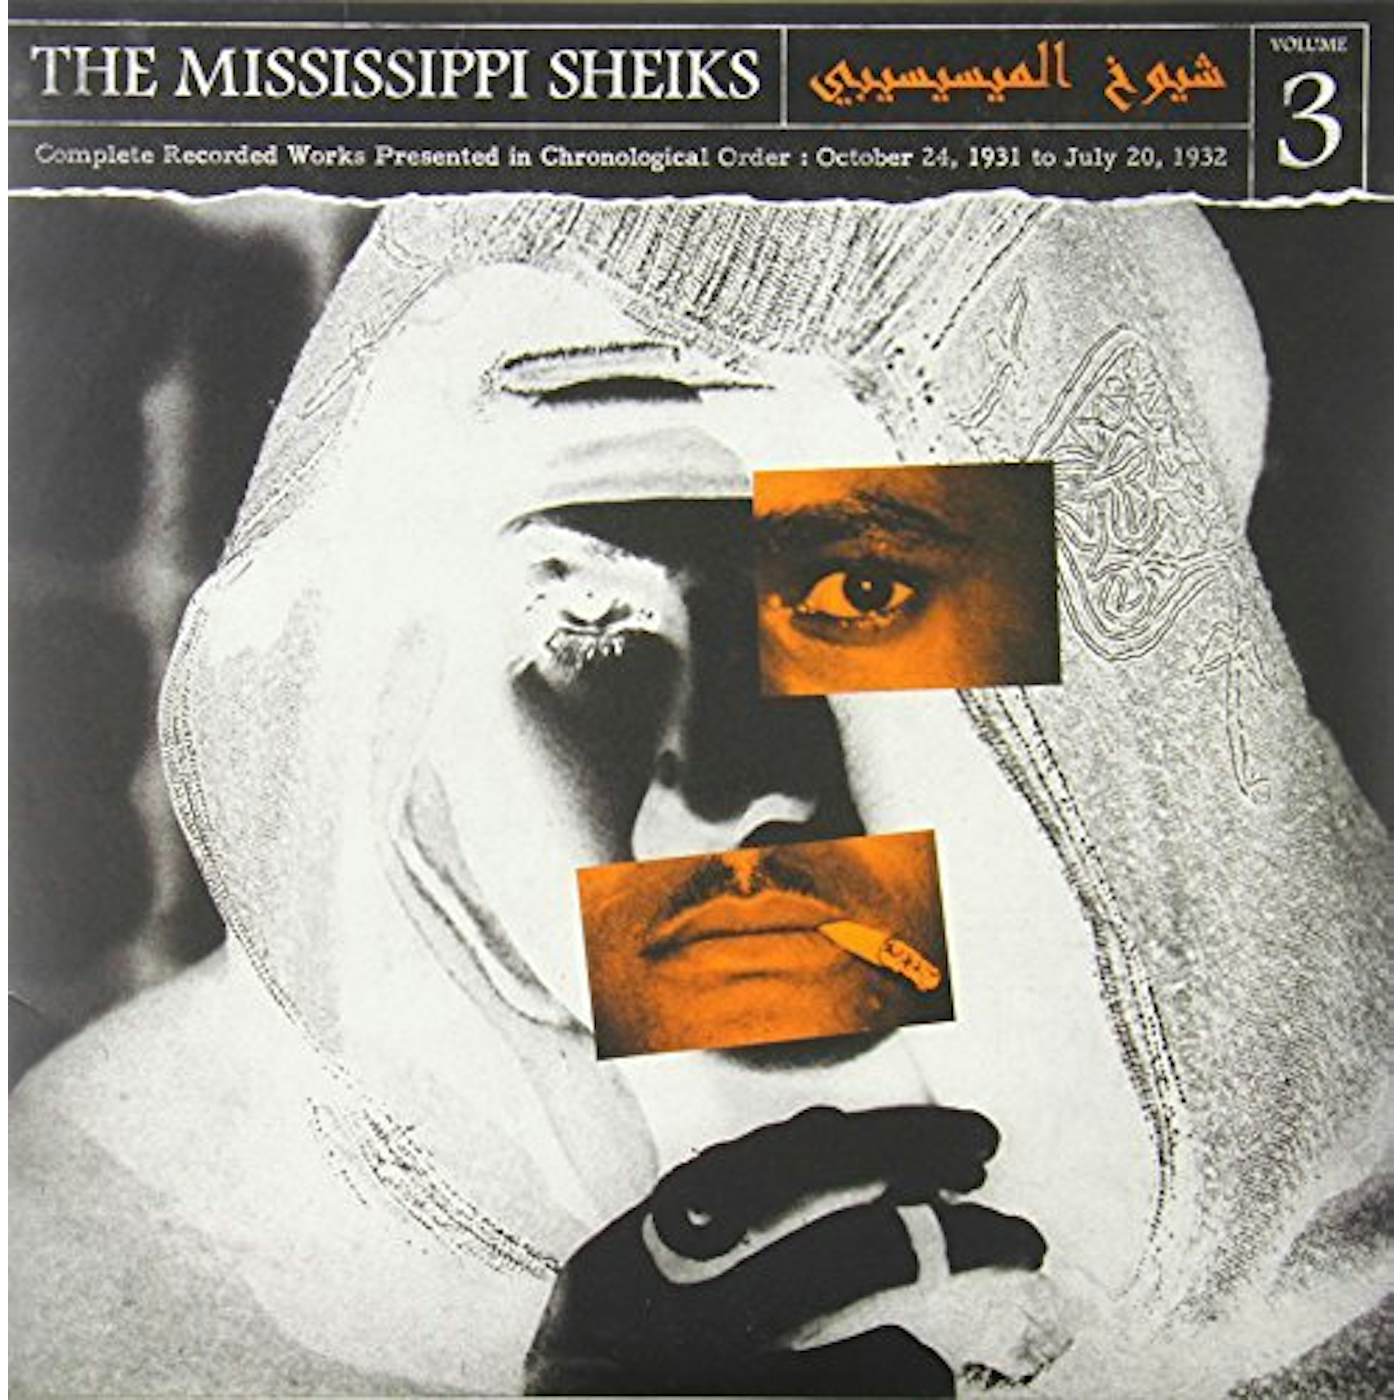 Mississippi Sheiks COMPLETE RECORDED WORKS IN CHRONOLOGICAL ORDER 3 Vinyl Record